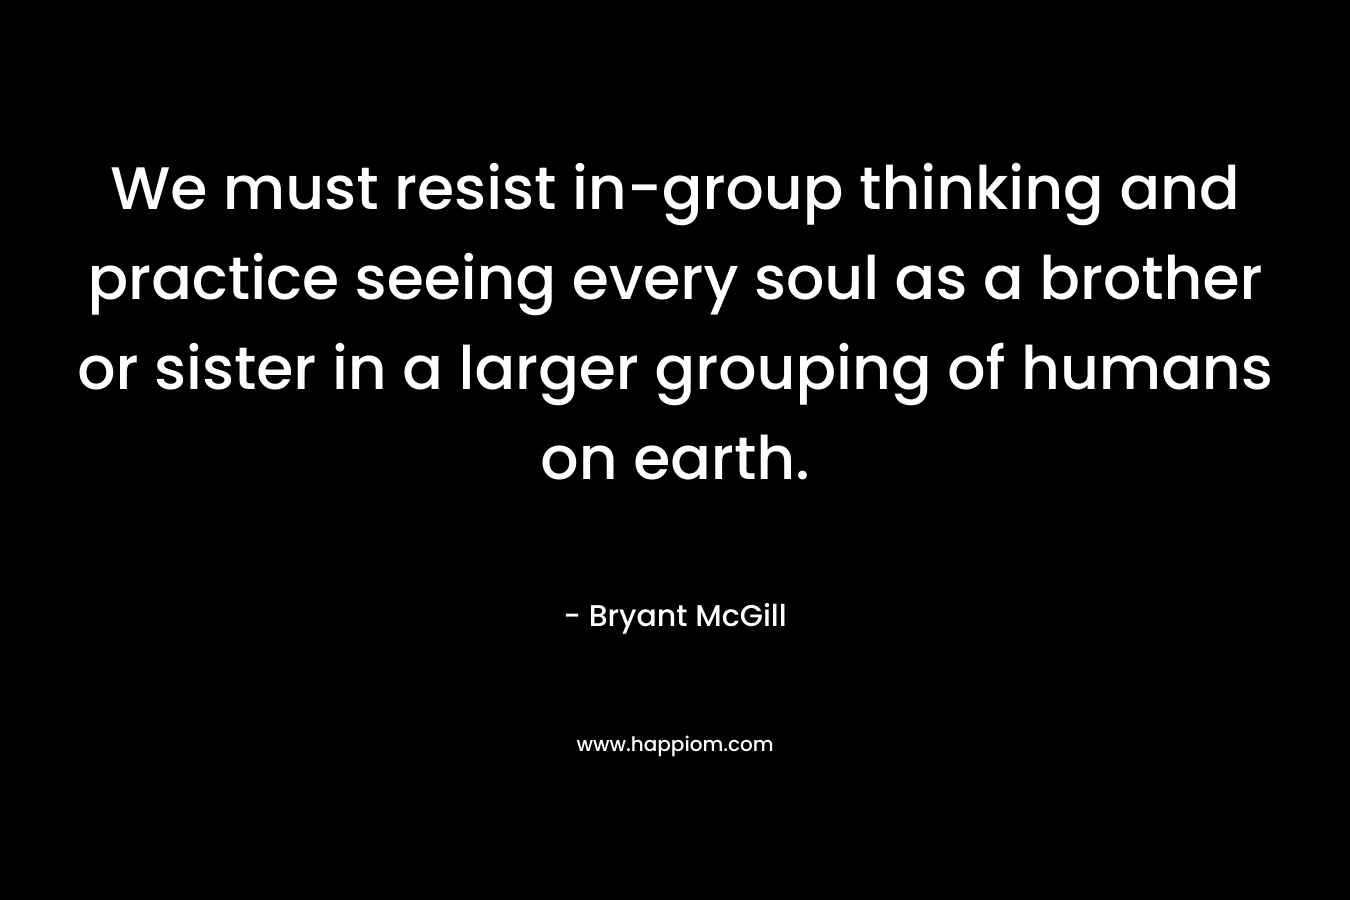 We must resist in-group thinking and practice seeing every soul as a brother or sister in a larger grouping of humans on earth. – Bryant McGill